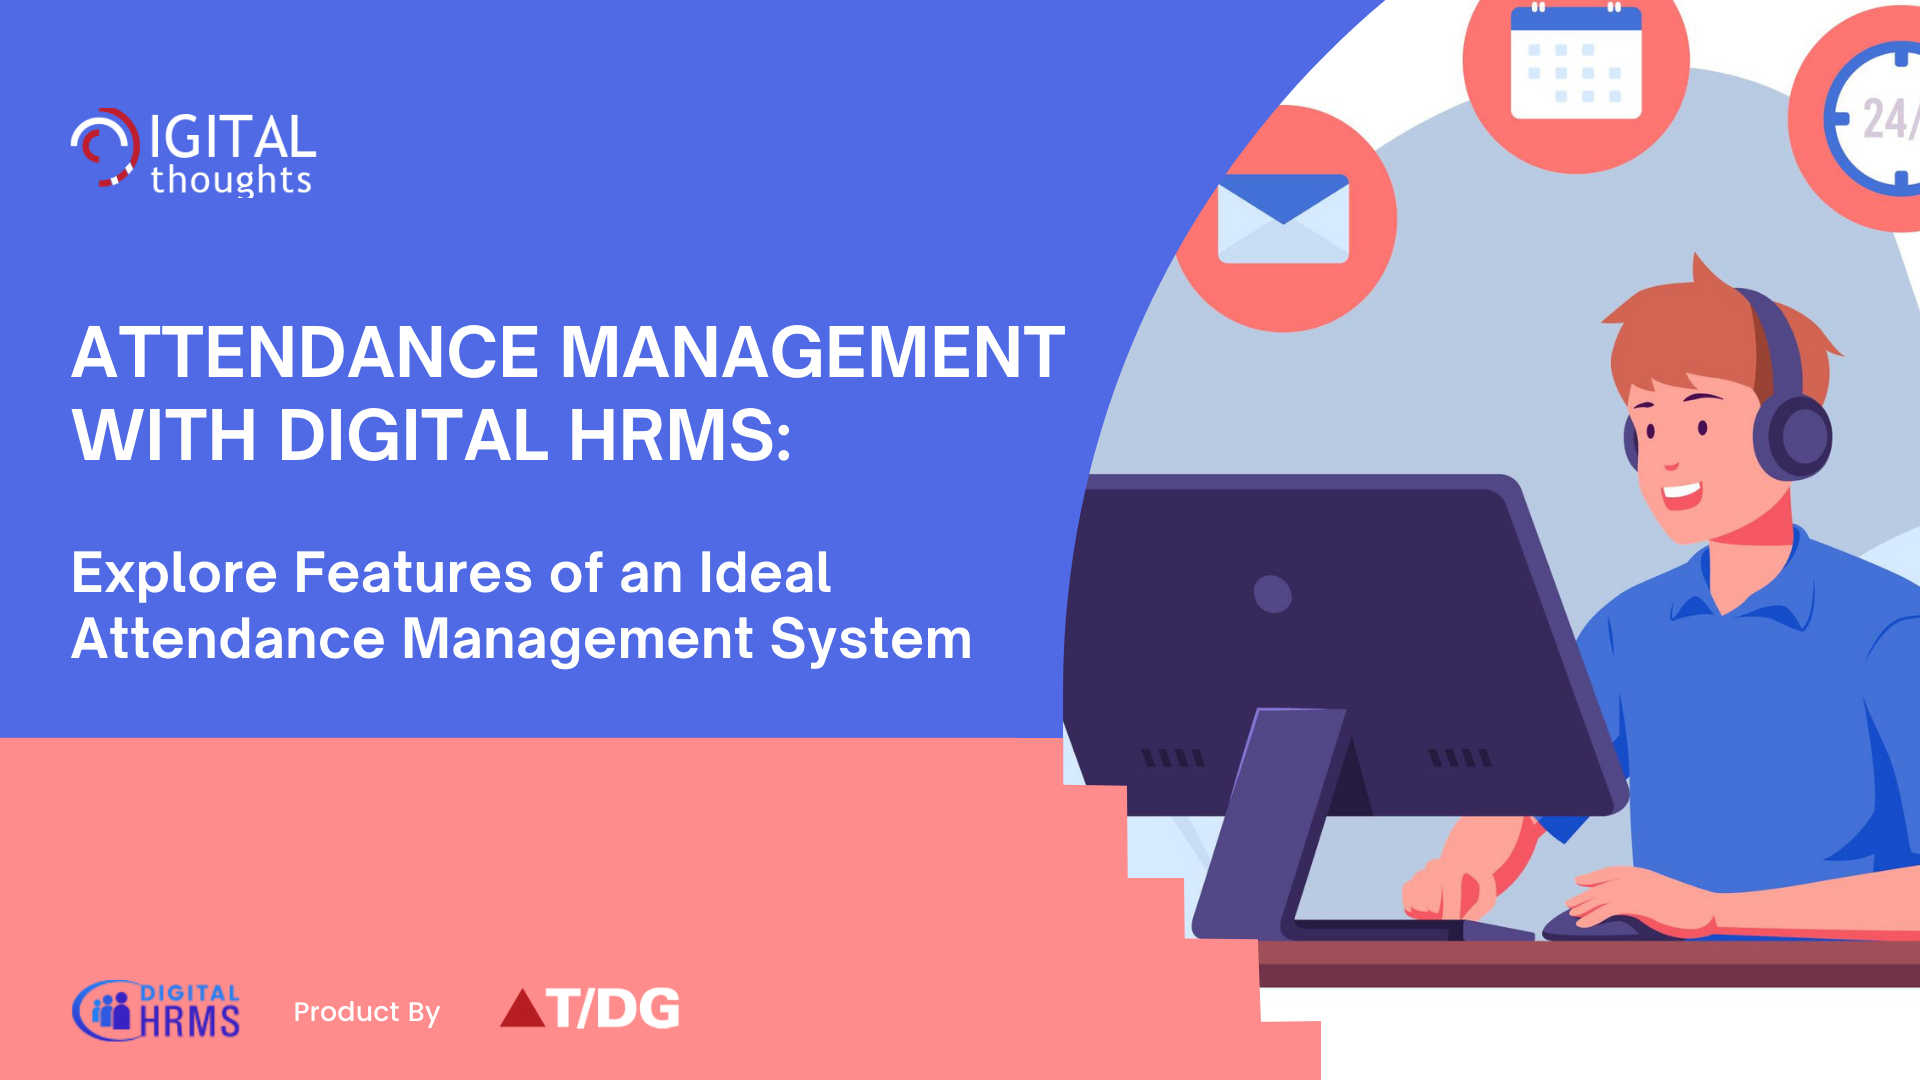 Attendance Management with Digital HRMS: Explore Features of an Ideal Attendance Management System